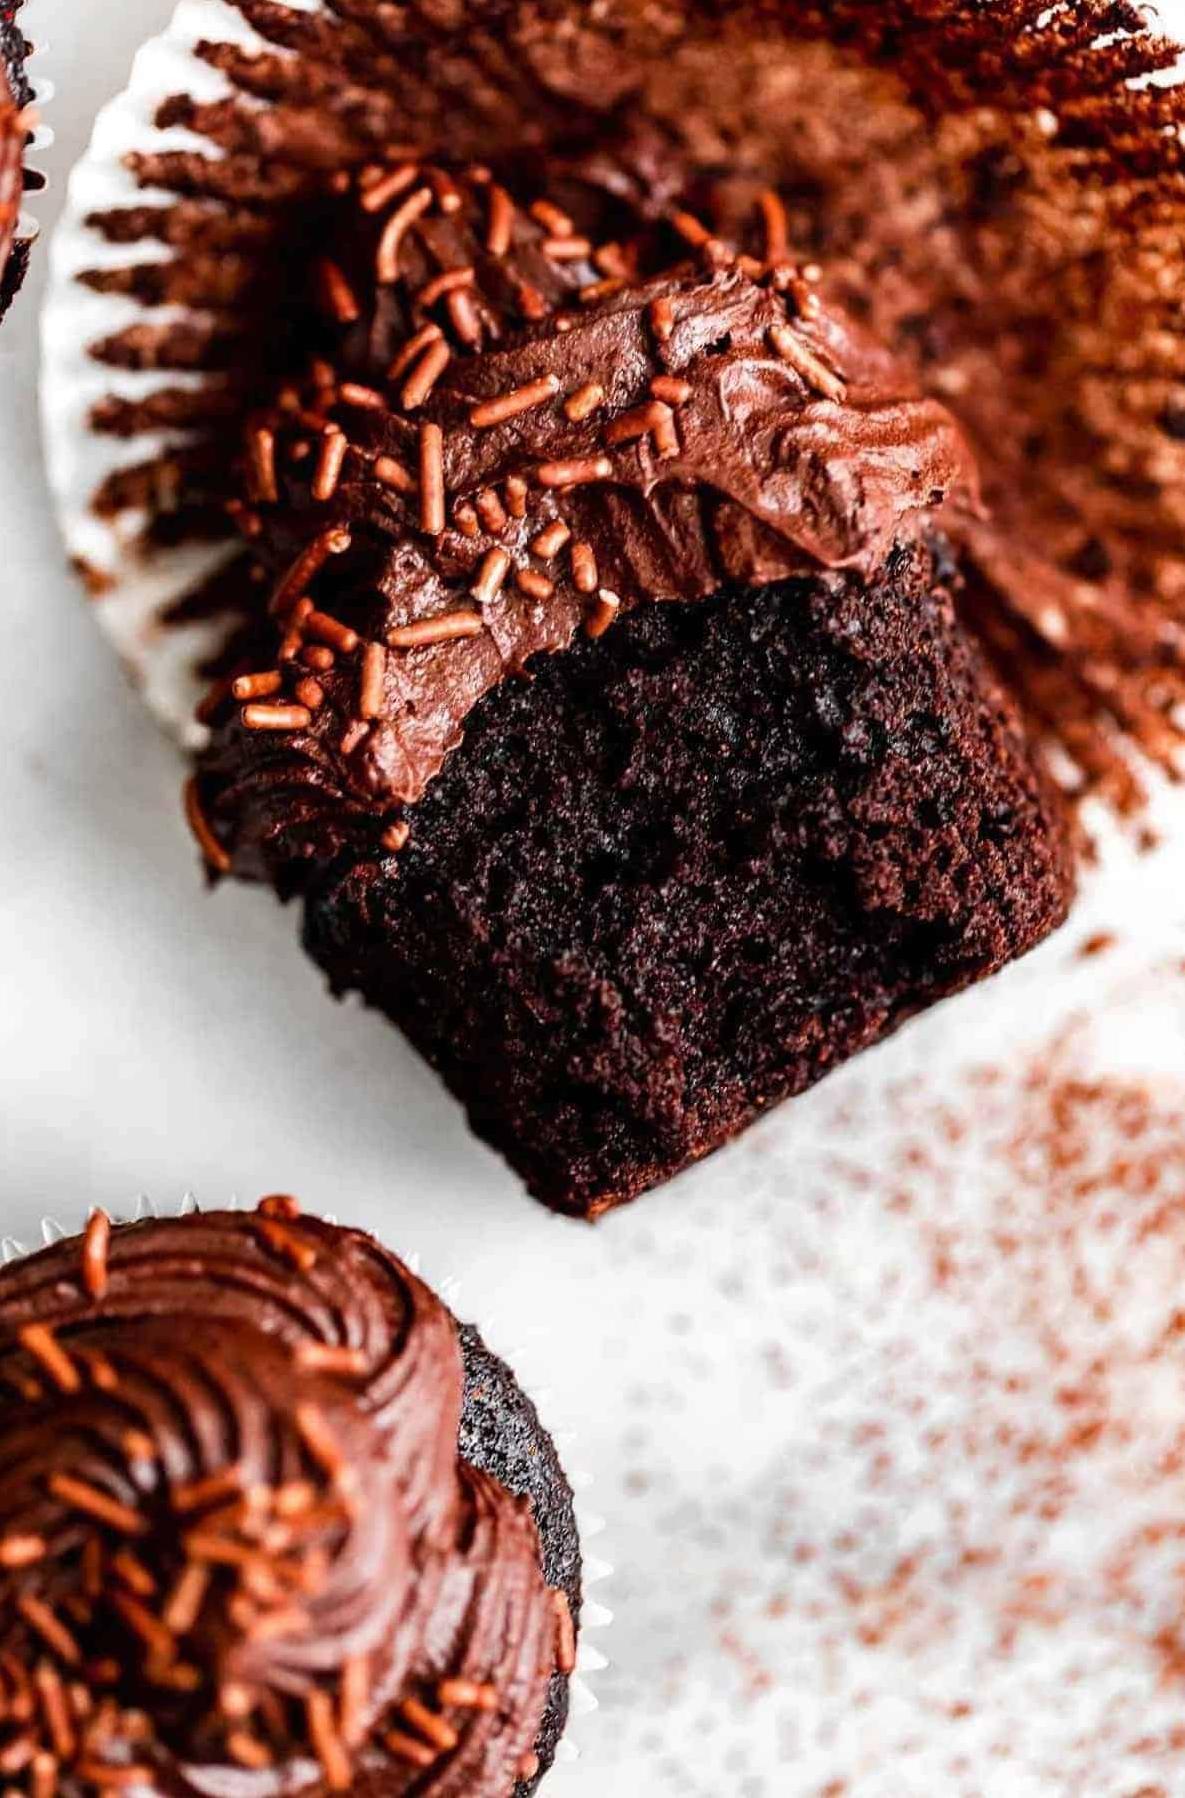  Bite into the moist, fluffy texture of these gluten-free cupcakes.